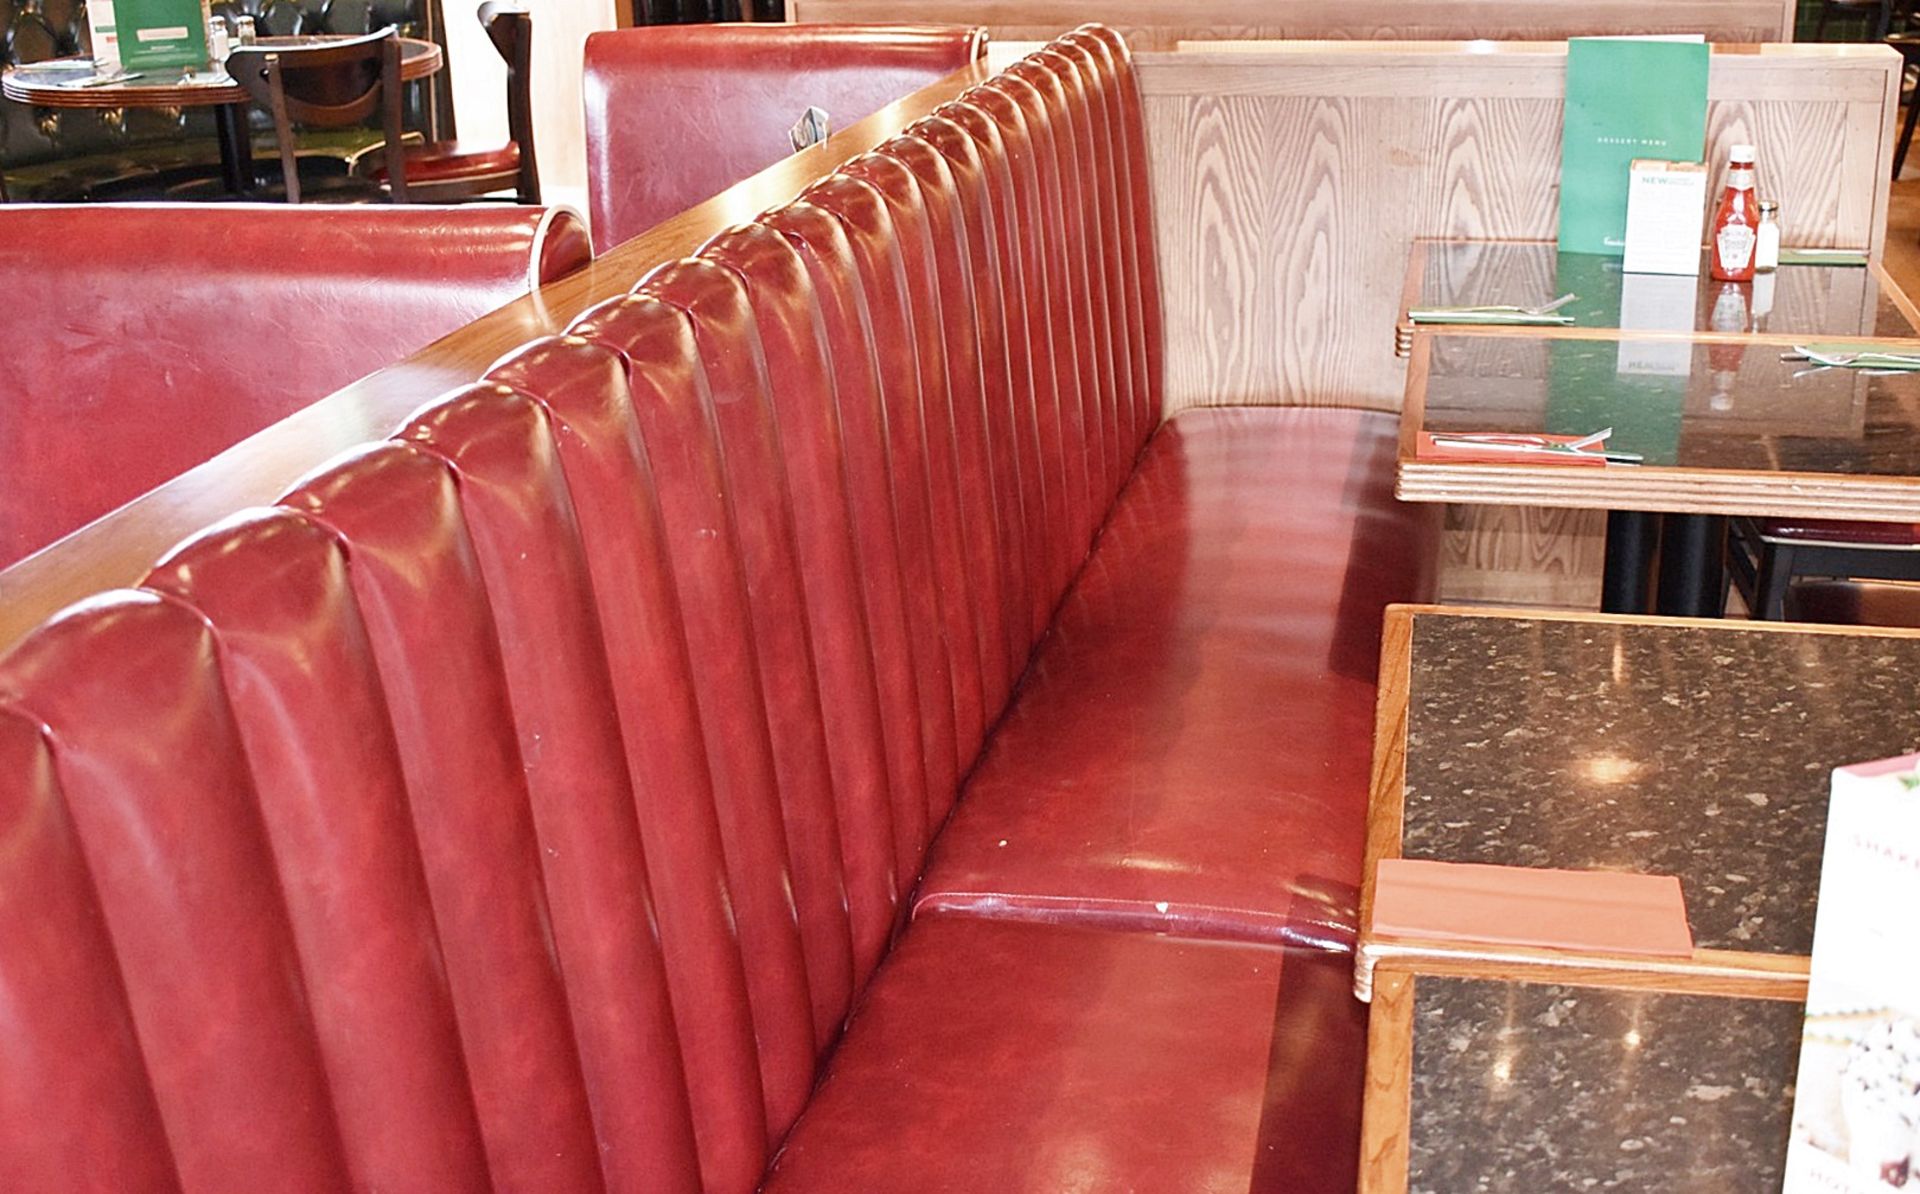 1 x Long Restaurant Seating Bench - Retro 1950s American Diner Design - Red Faux Leather - Image 2 of 5